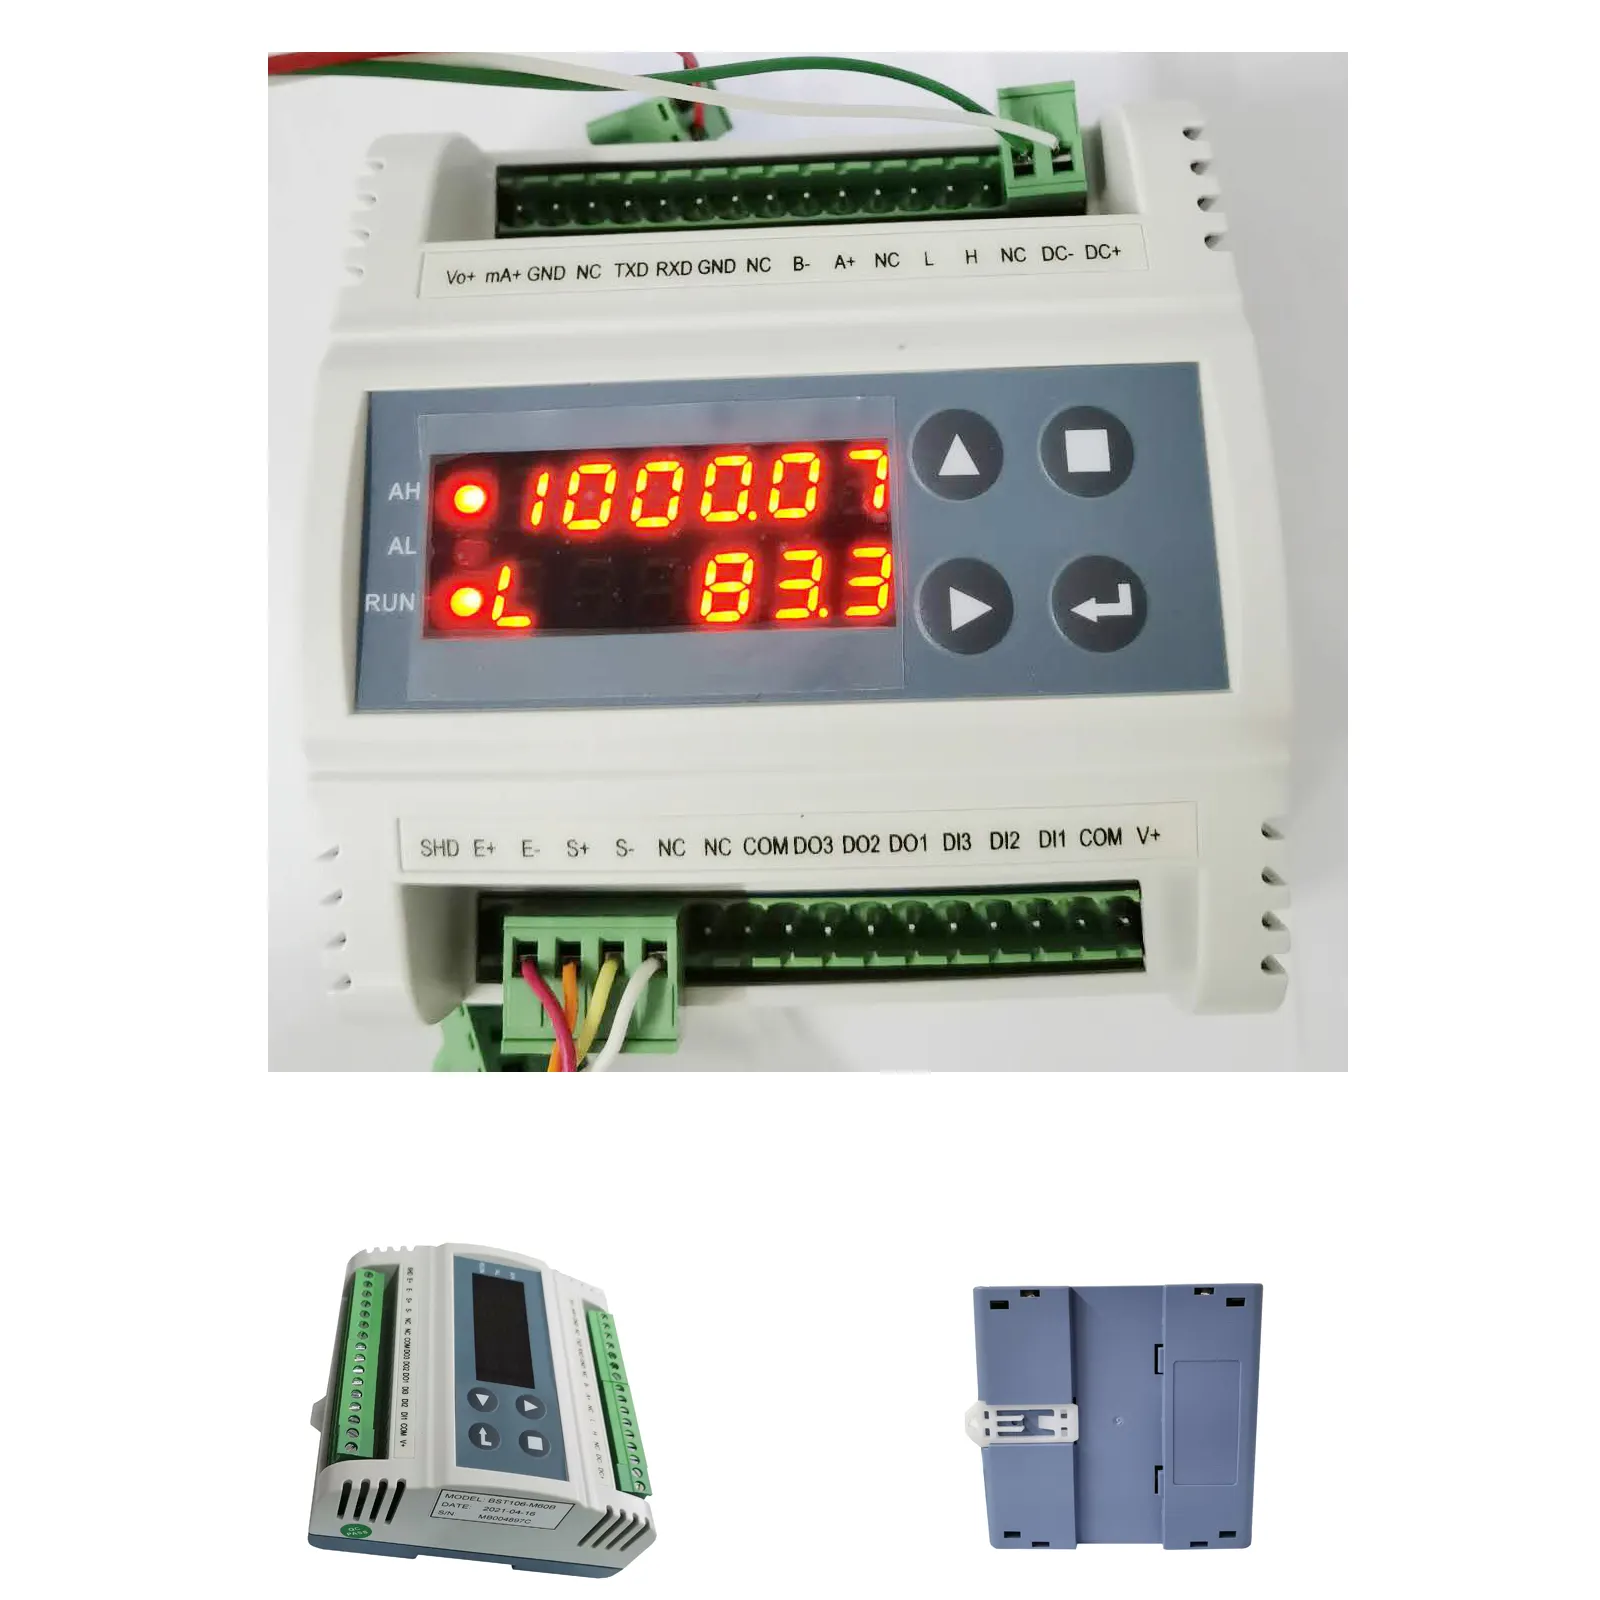 LED display weighing module for weight display, trasmitting